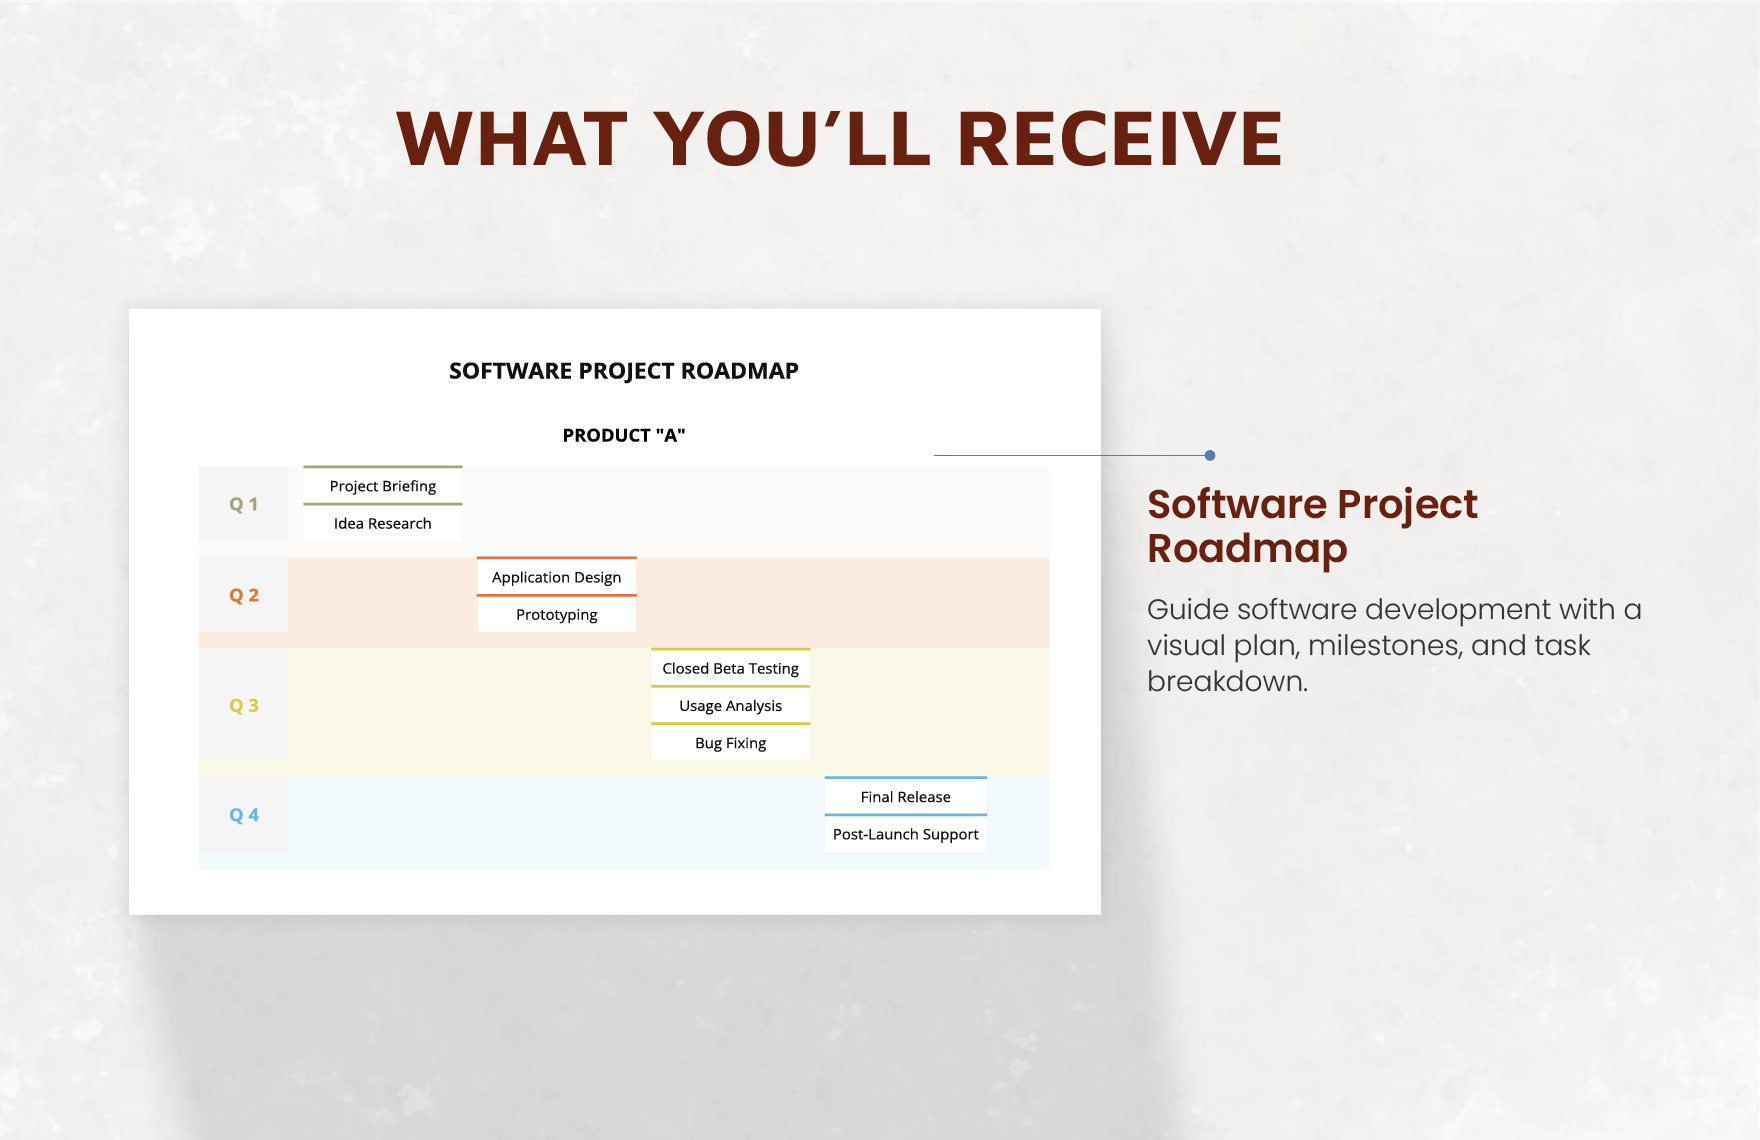 Software Project Roadmap Template